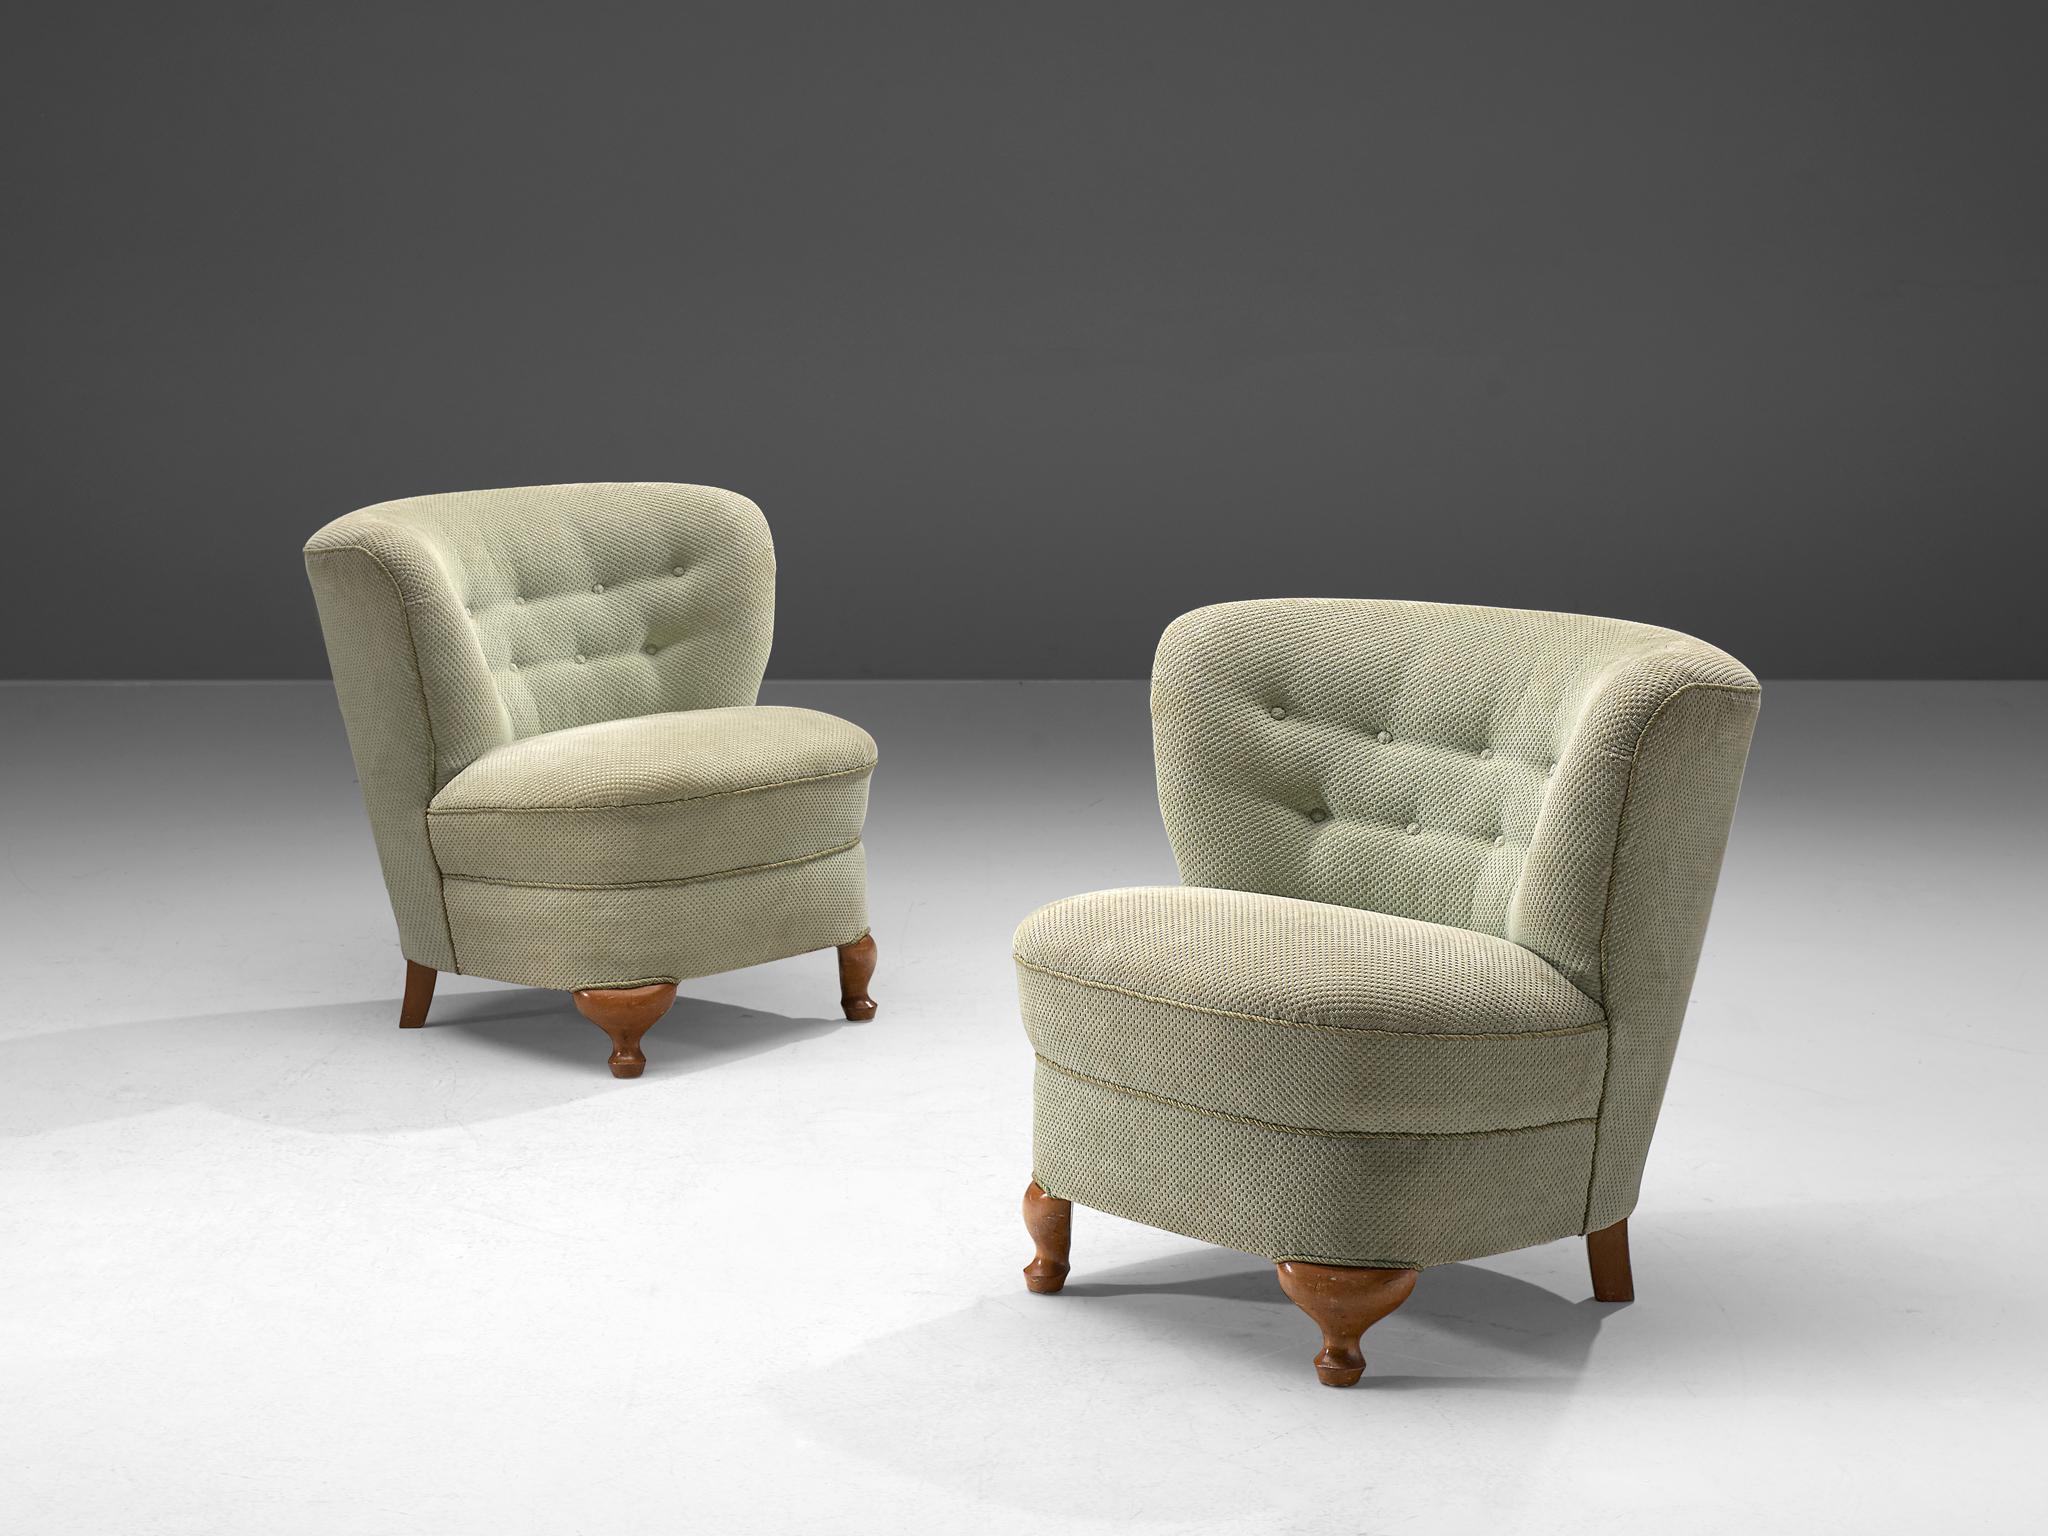 Pair of lounge chairs, fabric and wood, France, 1950s

These elegant, curved chairs are bold and round. The backrest flows slightly outwards when seen from the seat which is the reason that this chair has a very dynamic look. This voluptuous chair